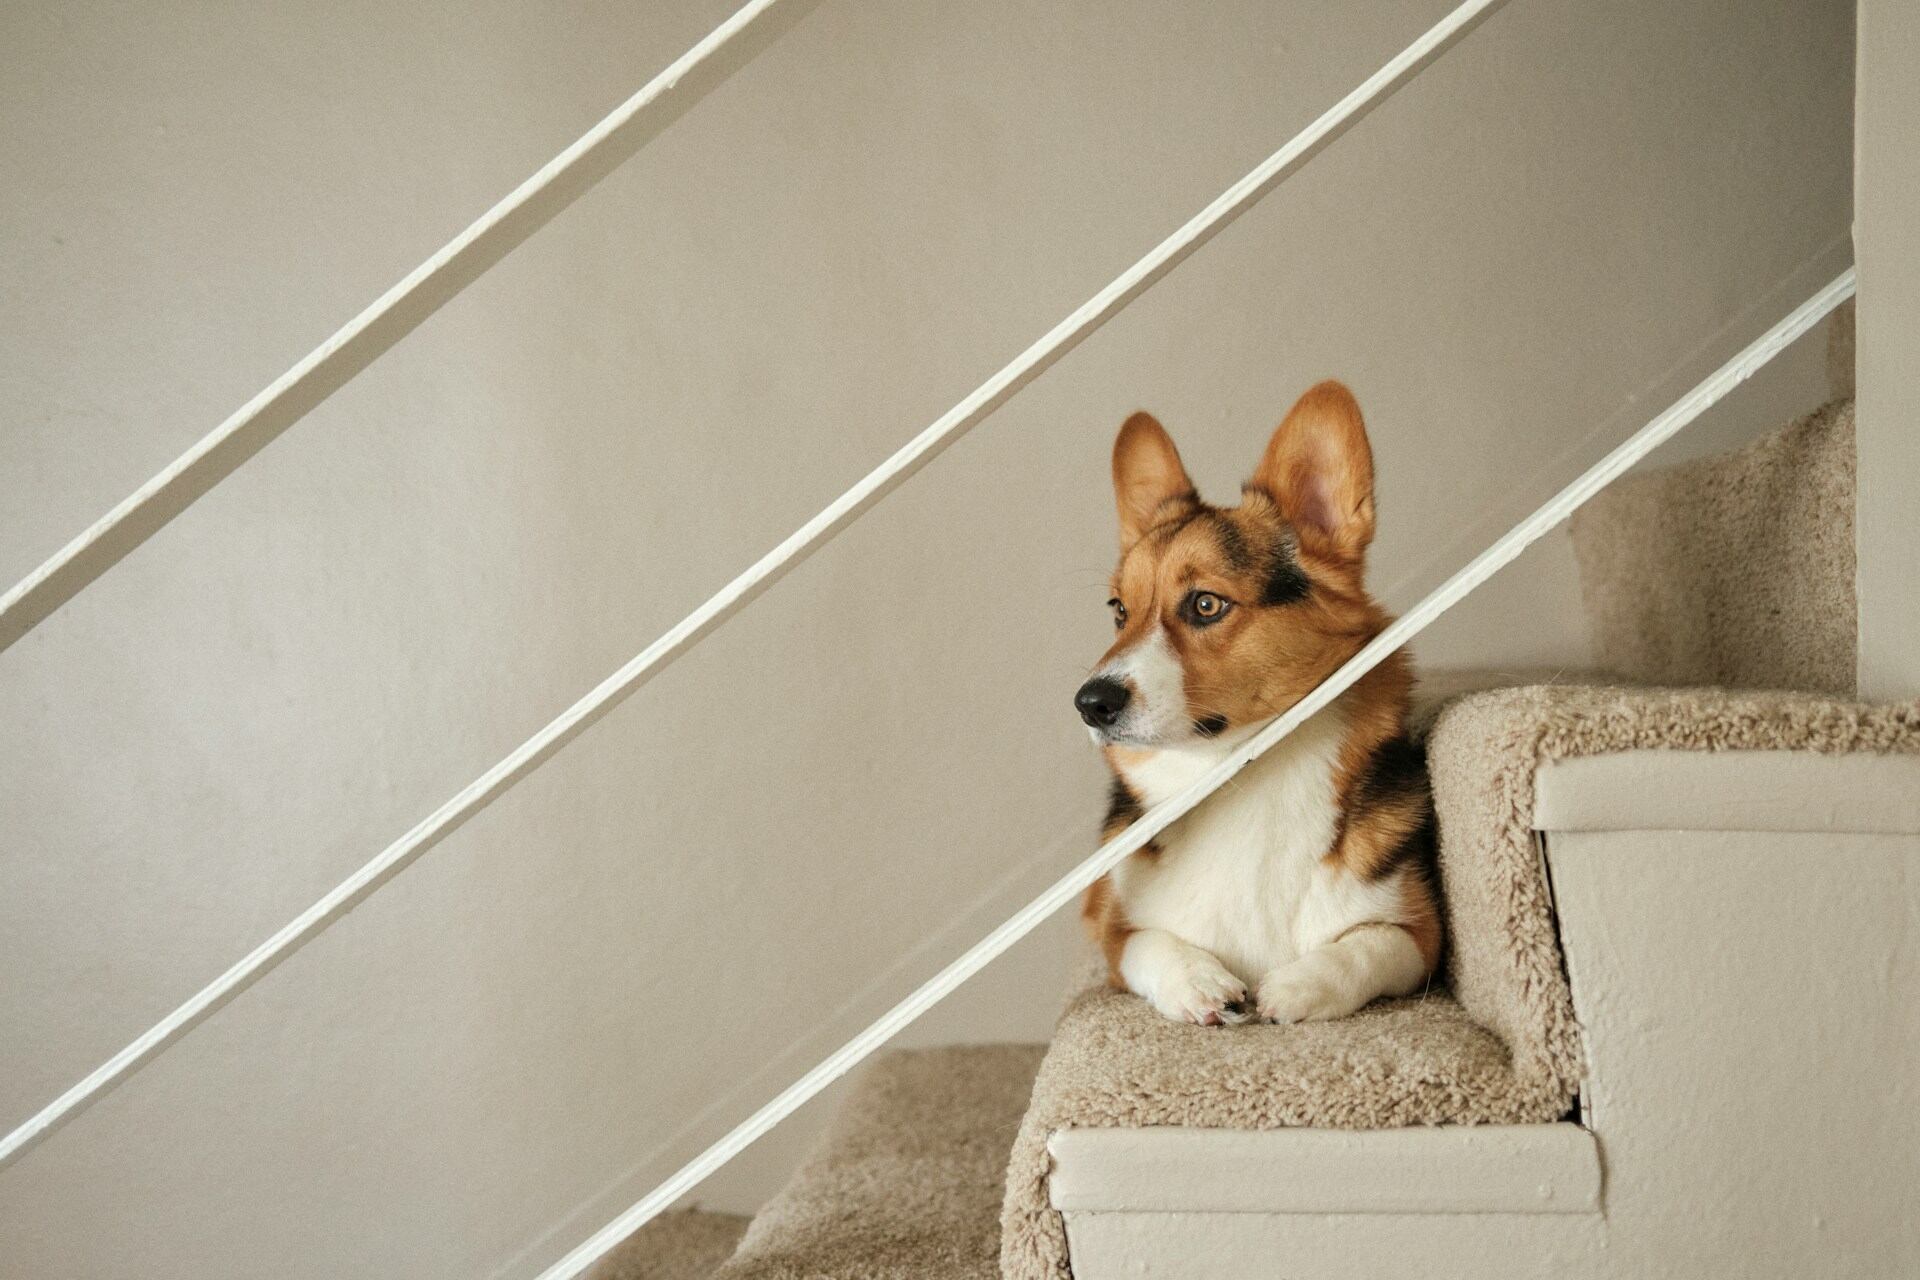 A Corgi sitting on a staircase indoors